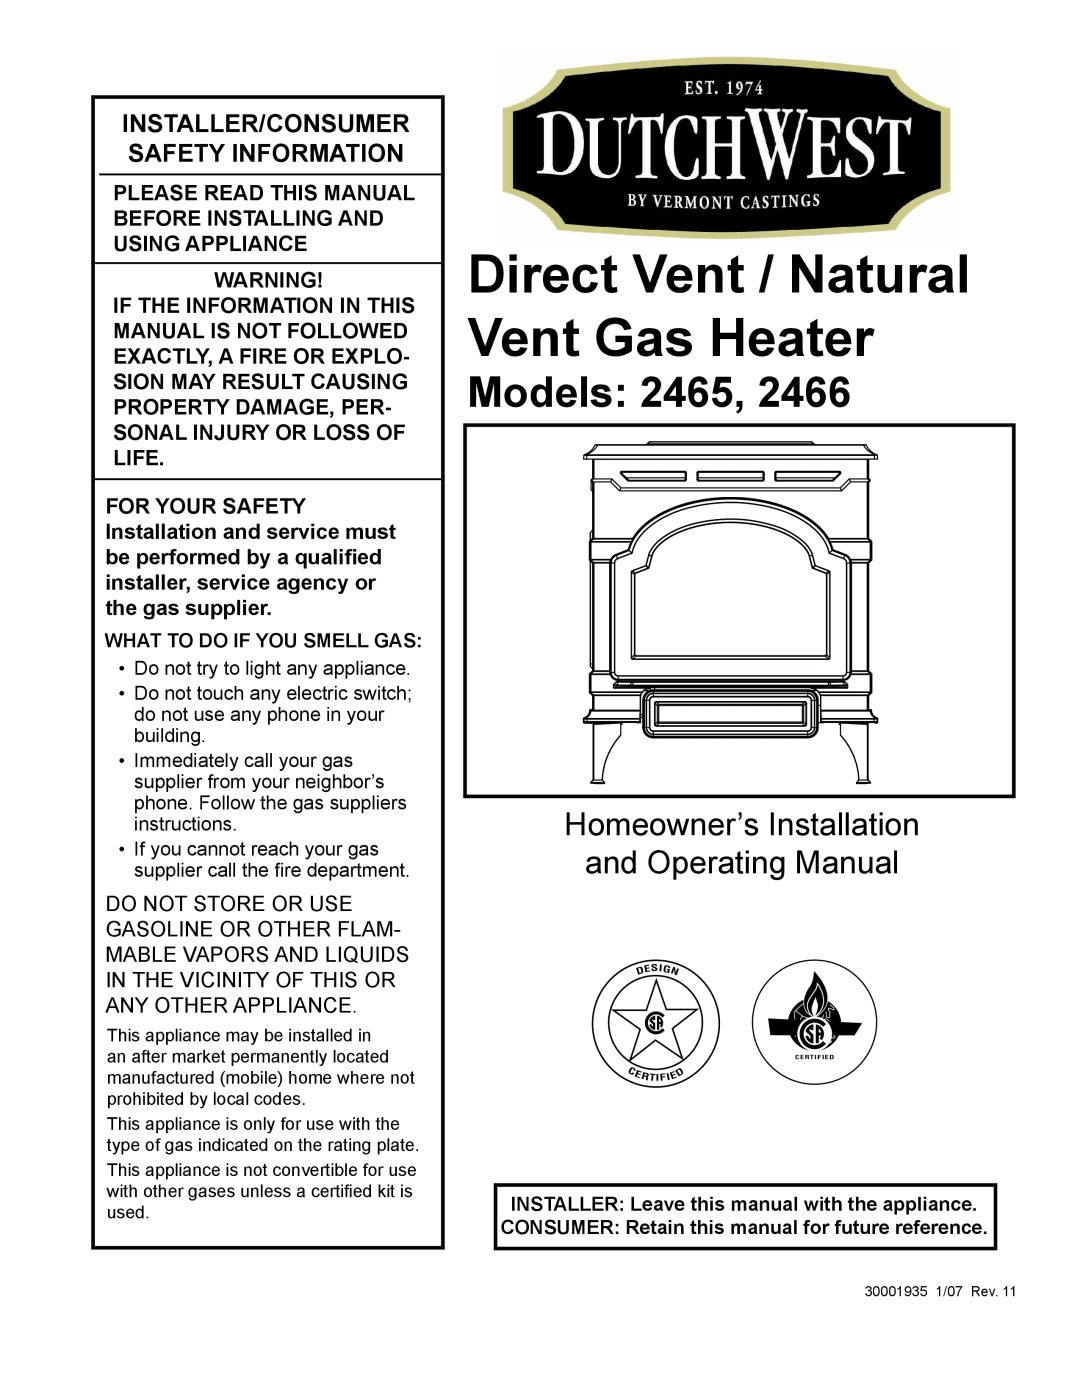 Vermont Casting 2465 manual Direct Vent / Natural Vent Gas Heater, Models, Homeowner’s Installation and Operating Manual 